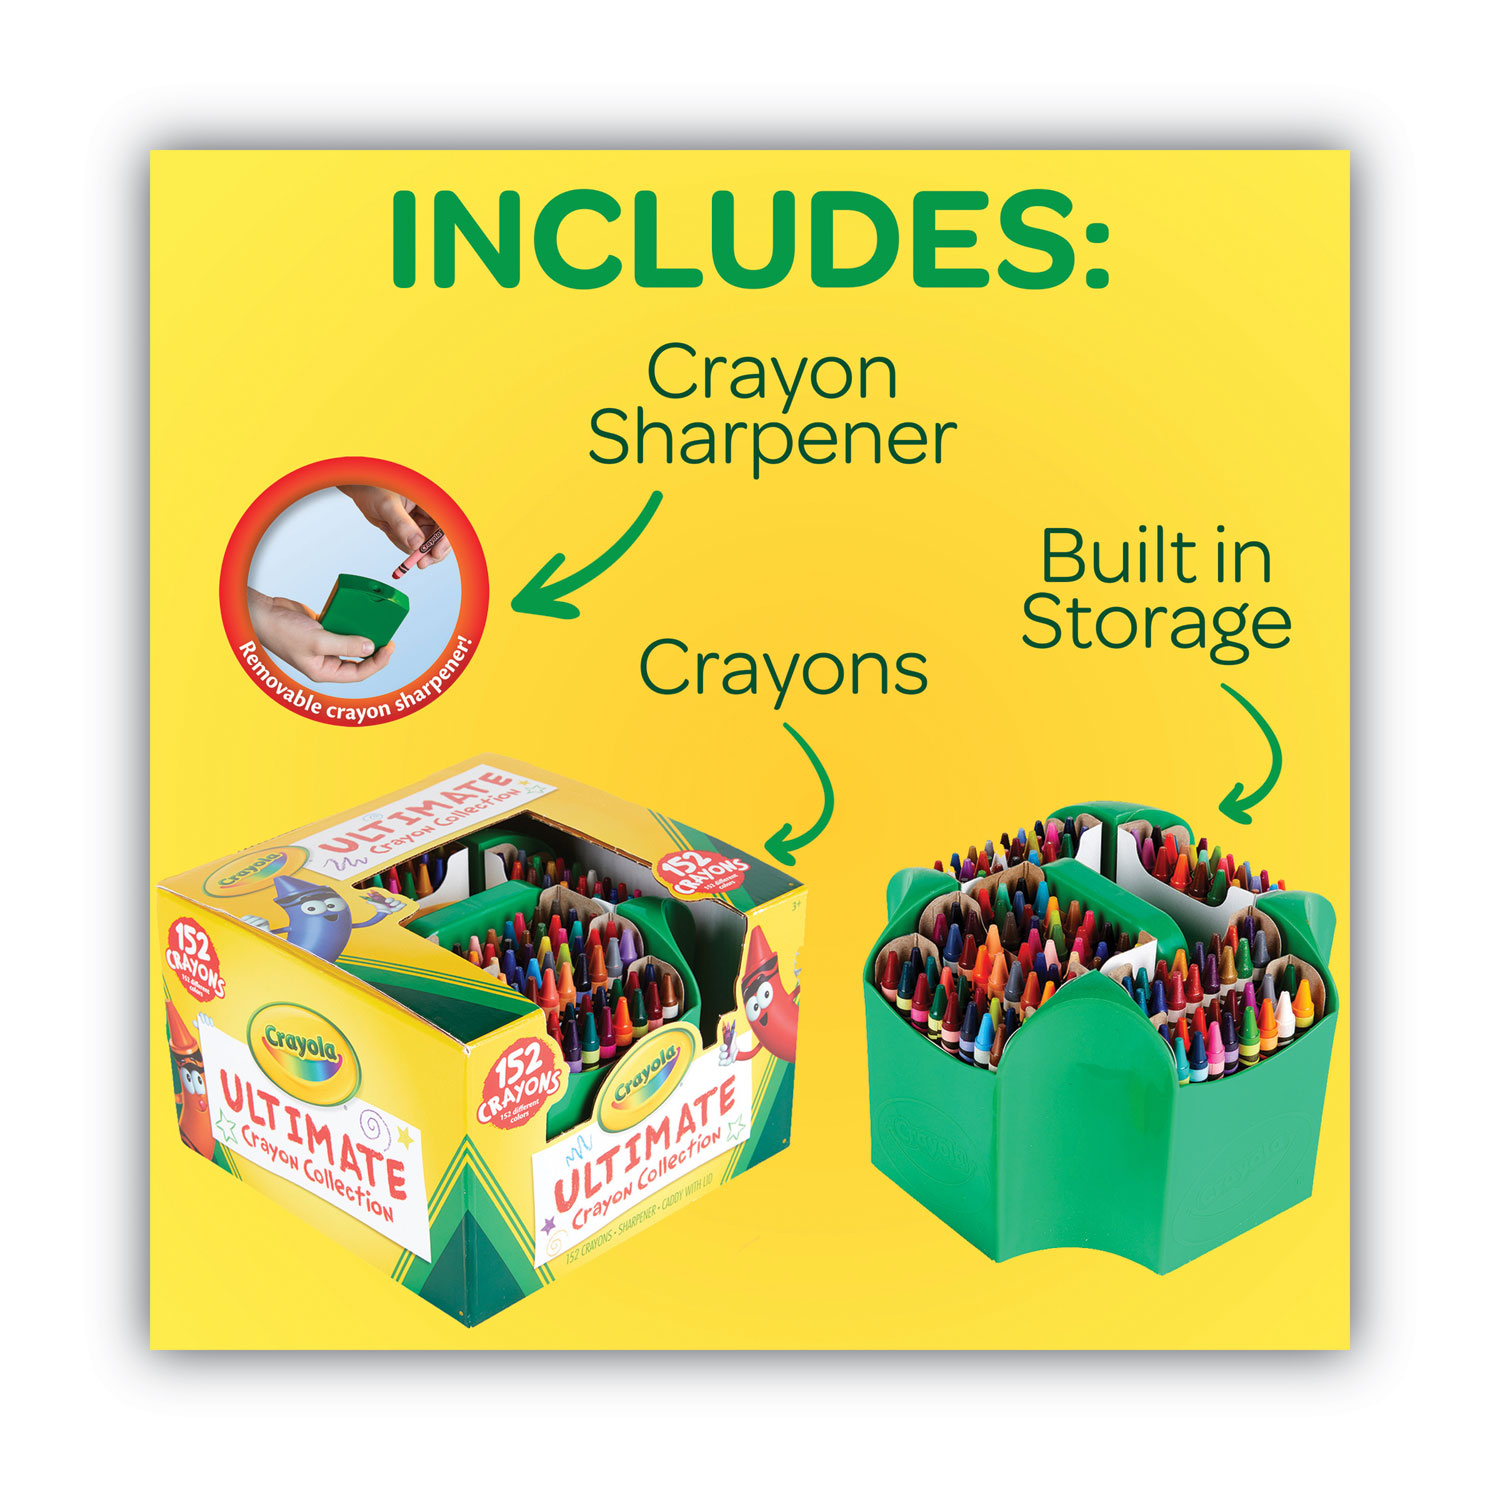 Vintage 72 Crayola Crayons Blue Case & Sharpener Most Of Crayons Are There